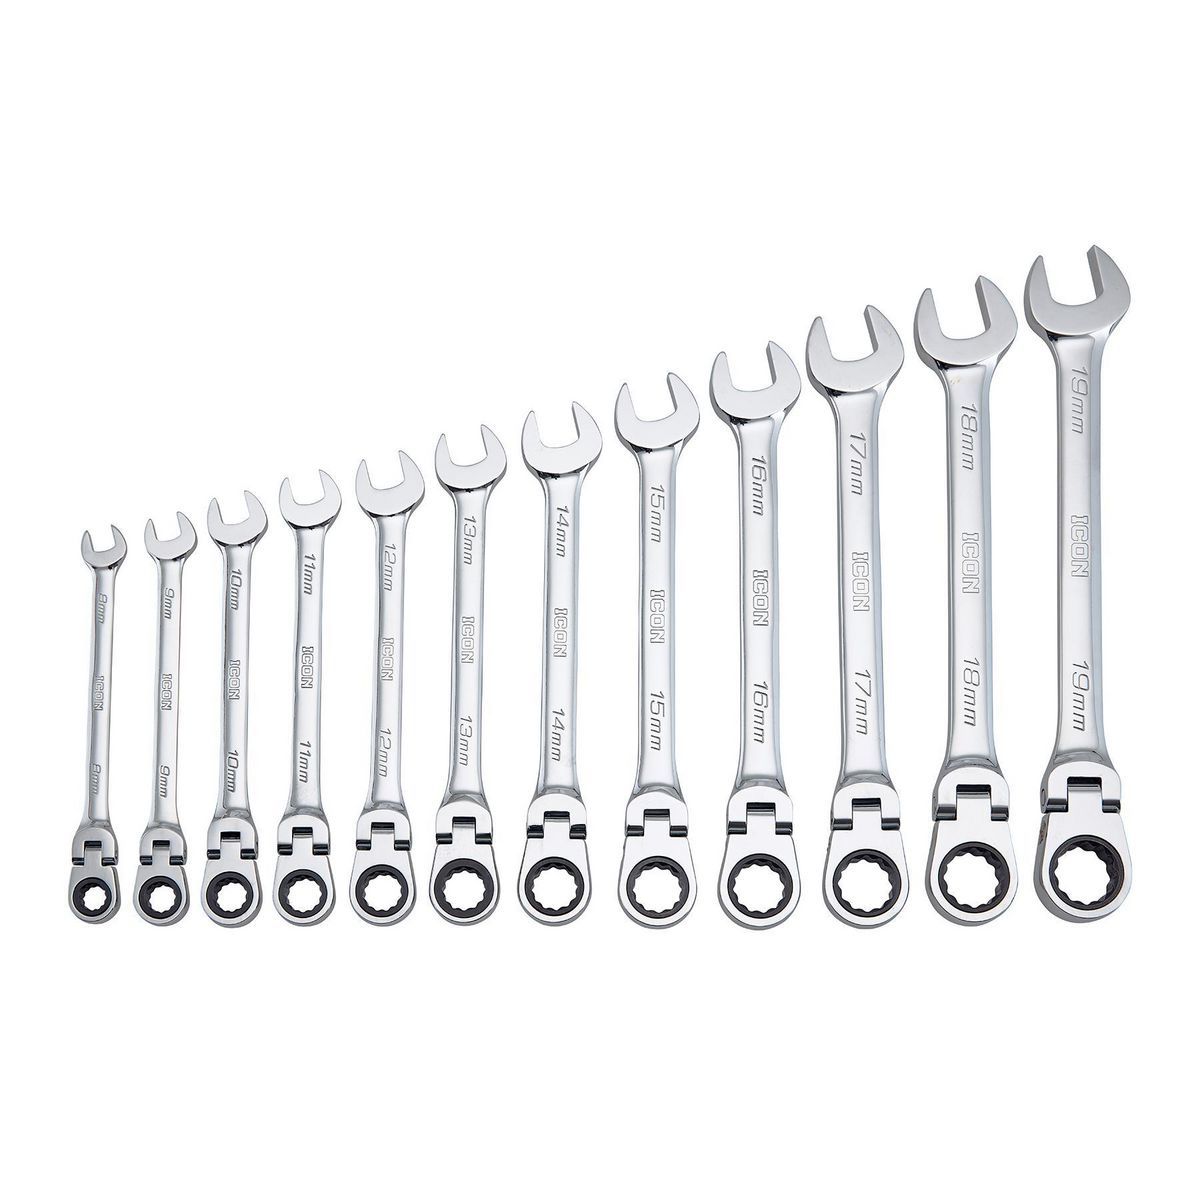 ICON Professional Flex-Head Metric Ratcheting Combination Wrench, 12 Piece